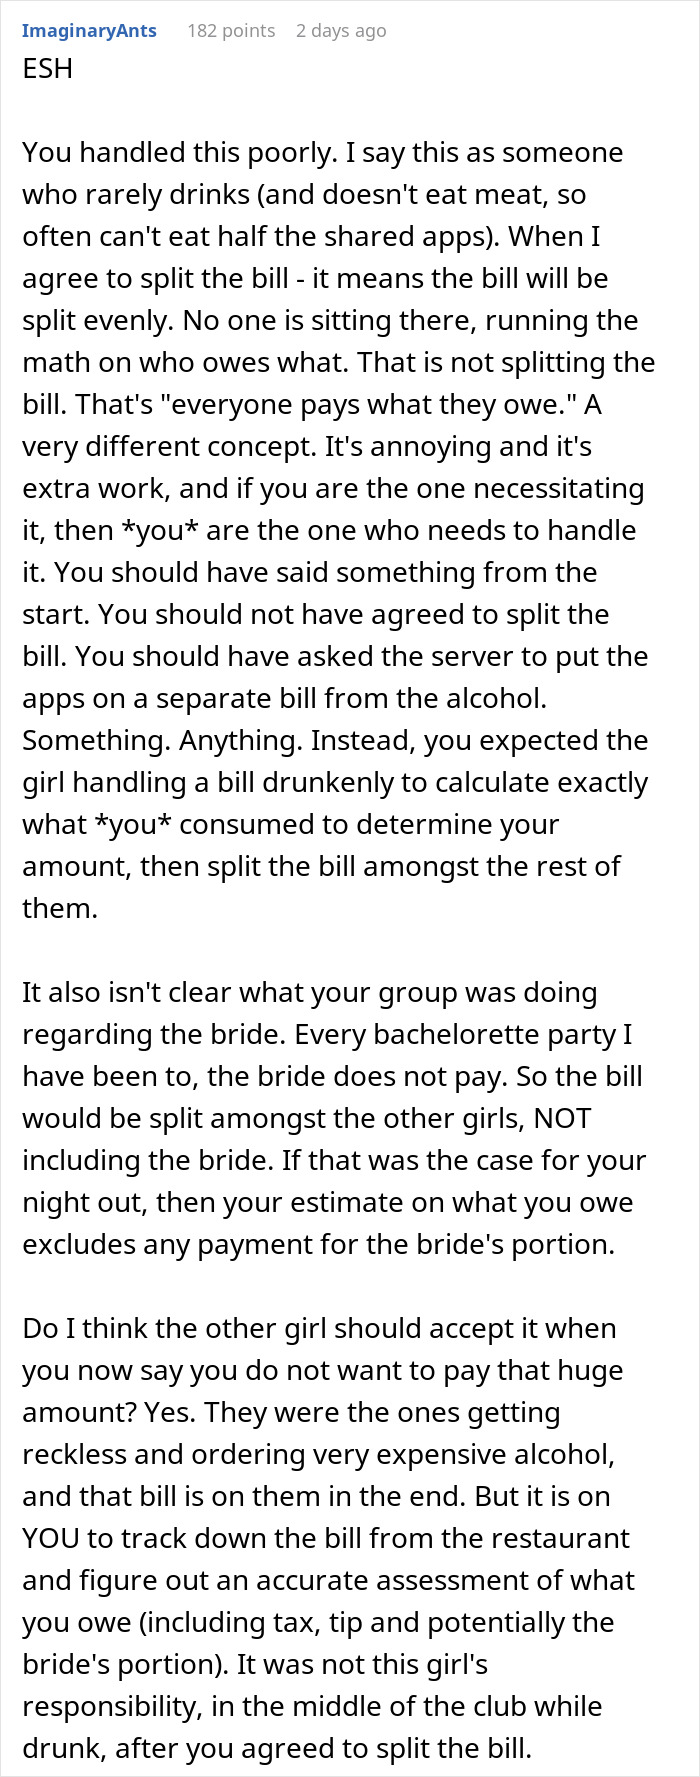 Woman Didn't Drink Alcohol, Refuses To Pay $470 Of Her 'Share' Of Bill, Asks If She's Wrong